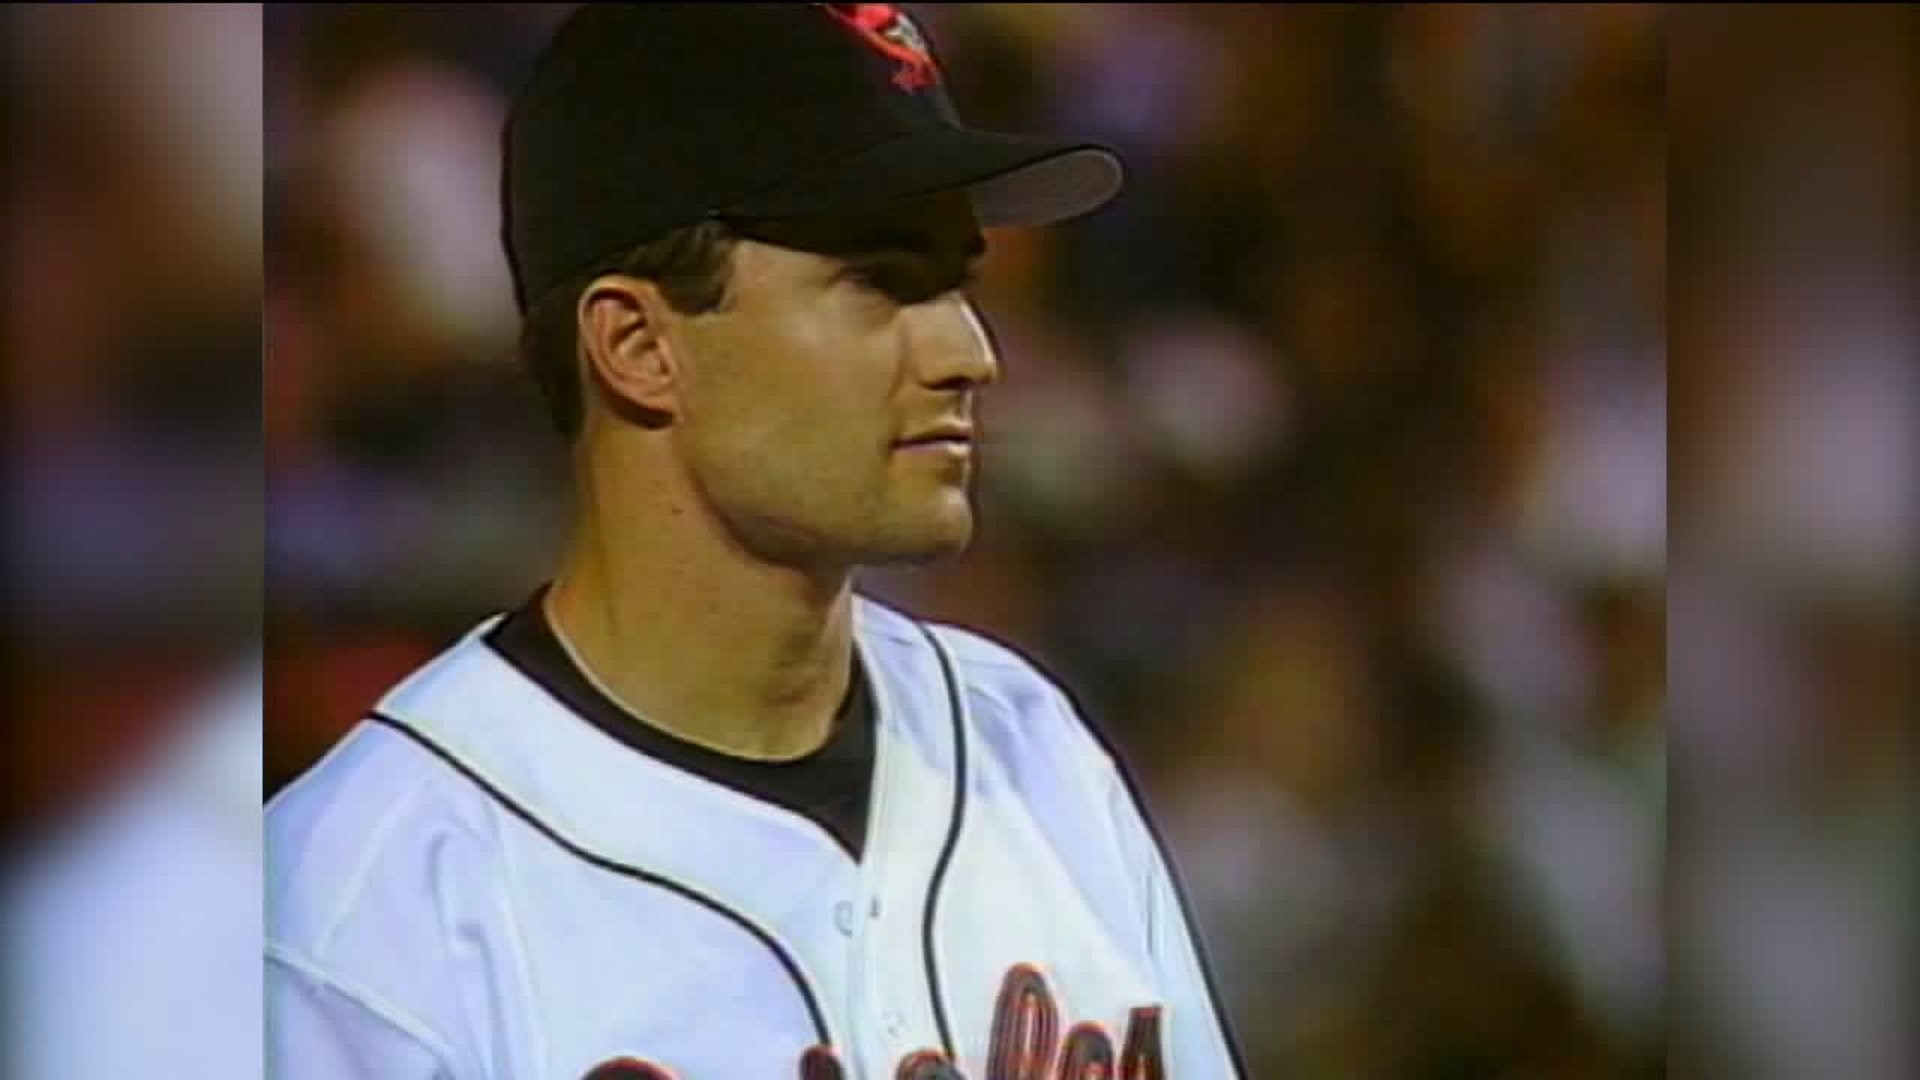 At Hall of Fame tour, former Orioles pitcher Mike Mussina still soaking in  'surprise' election